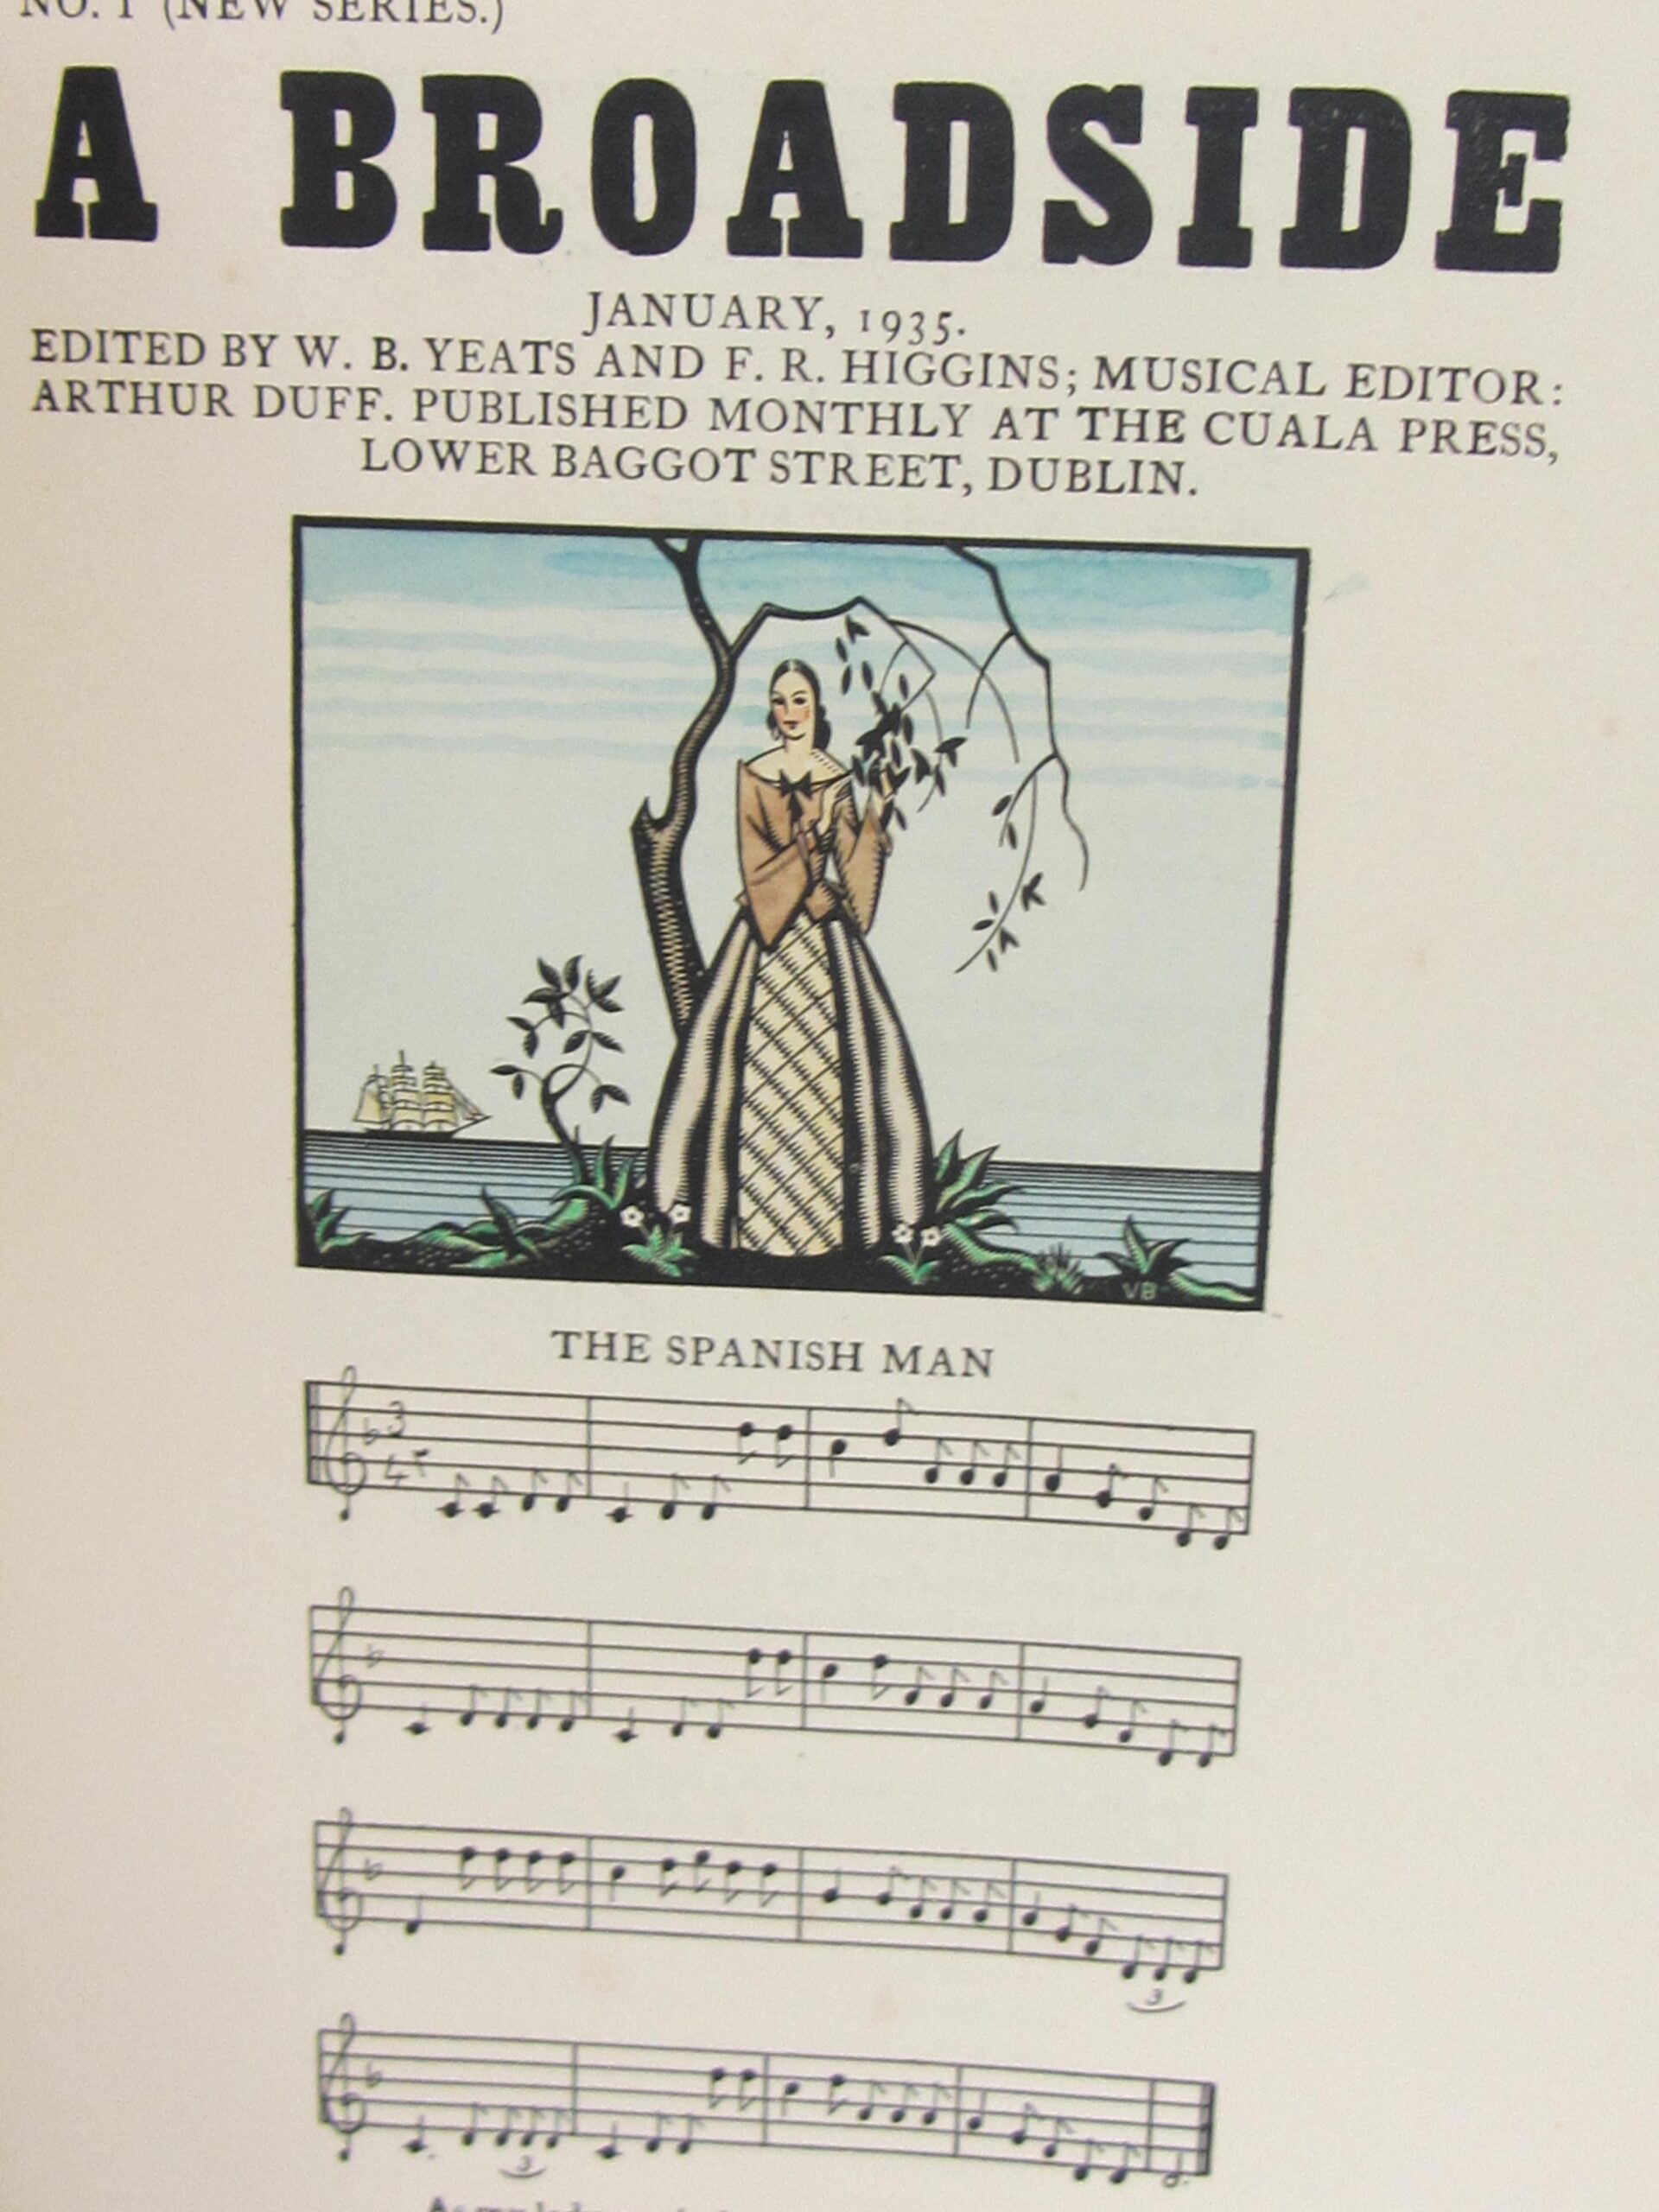 Broadsides. A Collection of Old and New Songs. One of 100 Signed Copies (1935) by W.B. Yeats & F.R. Higgins